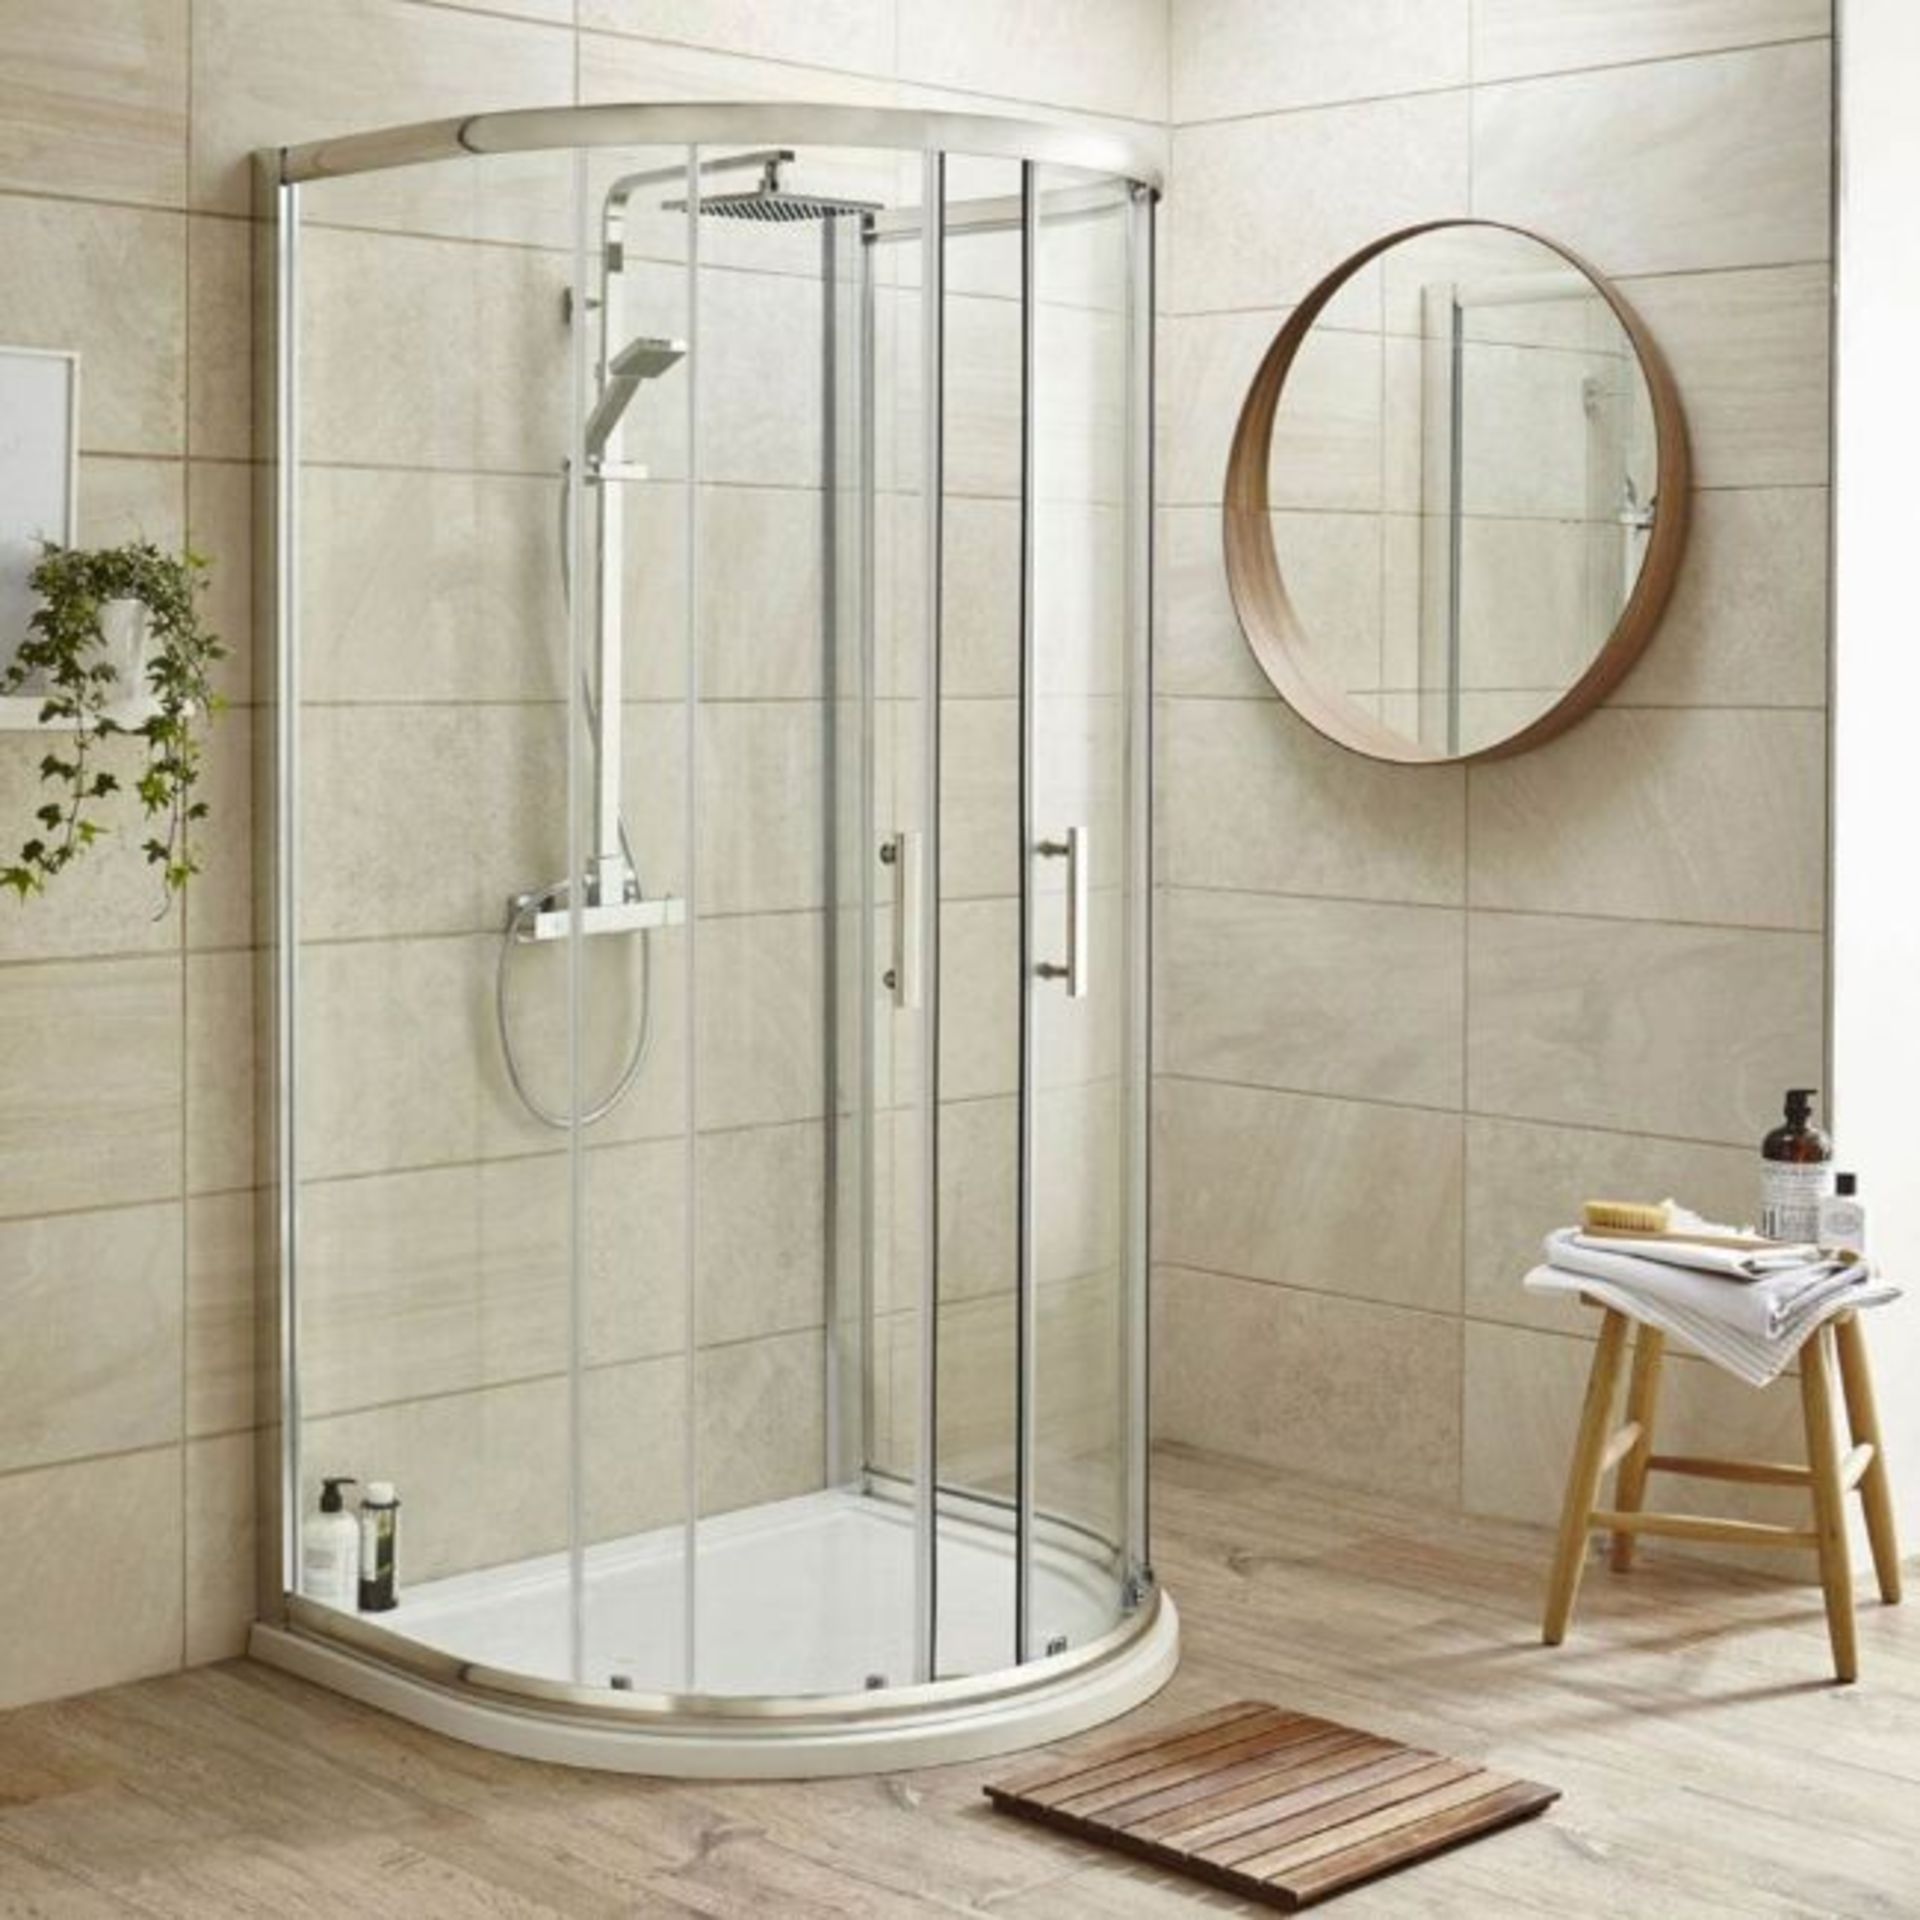 New (Pc129) Twyford's 770mm Hydro D Shape White Shower Tray. Low Profile Ultra Slim Design Gel ... - Image 2 of 2